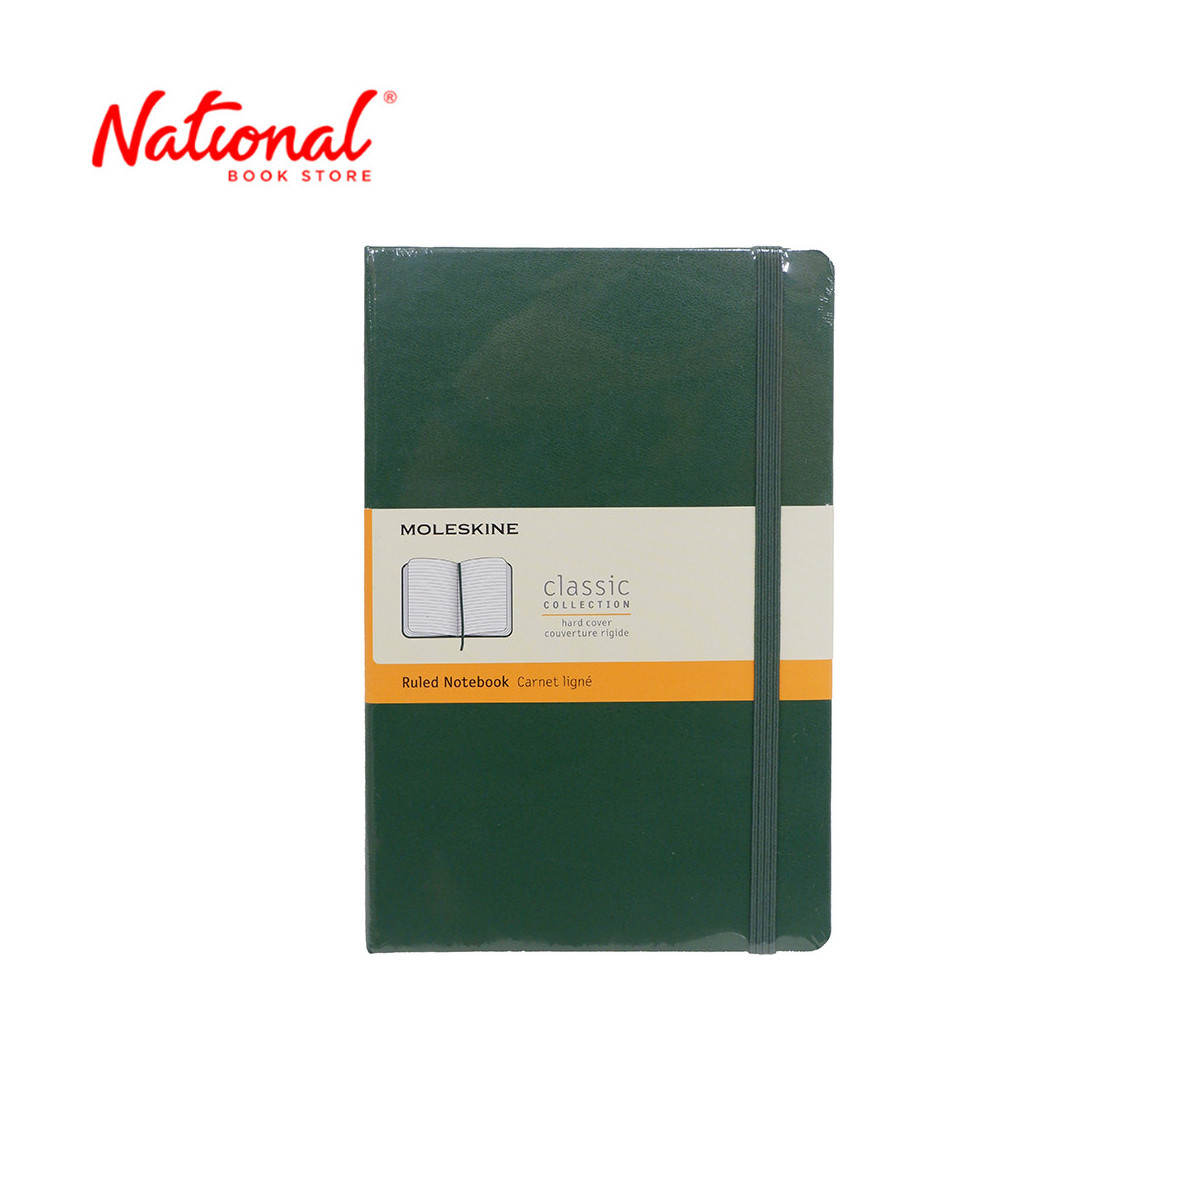 Moleskine Classic Notebook Ruled Hardcover Large 120 Leaves Myrtle Green - School Supplies